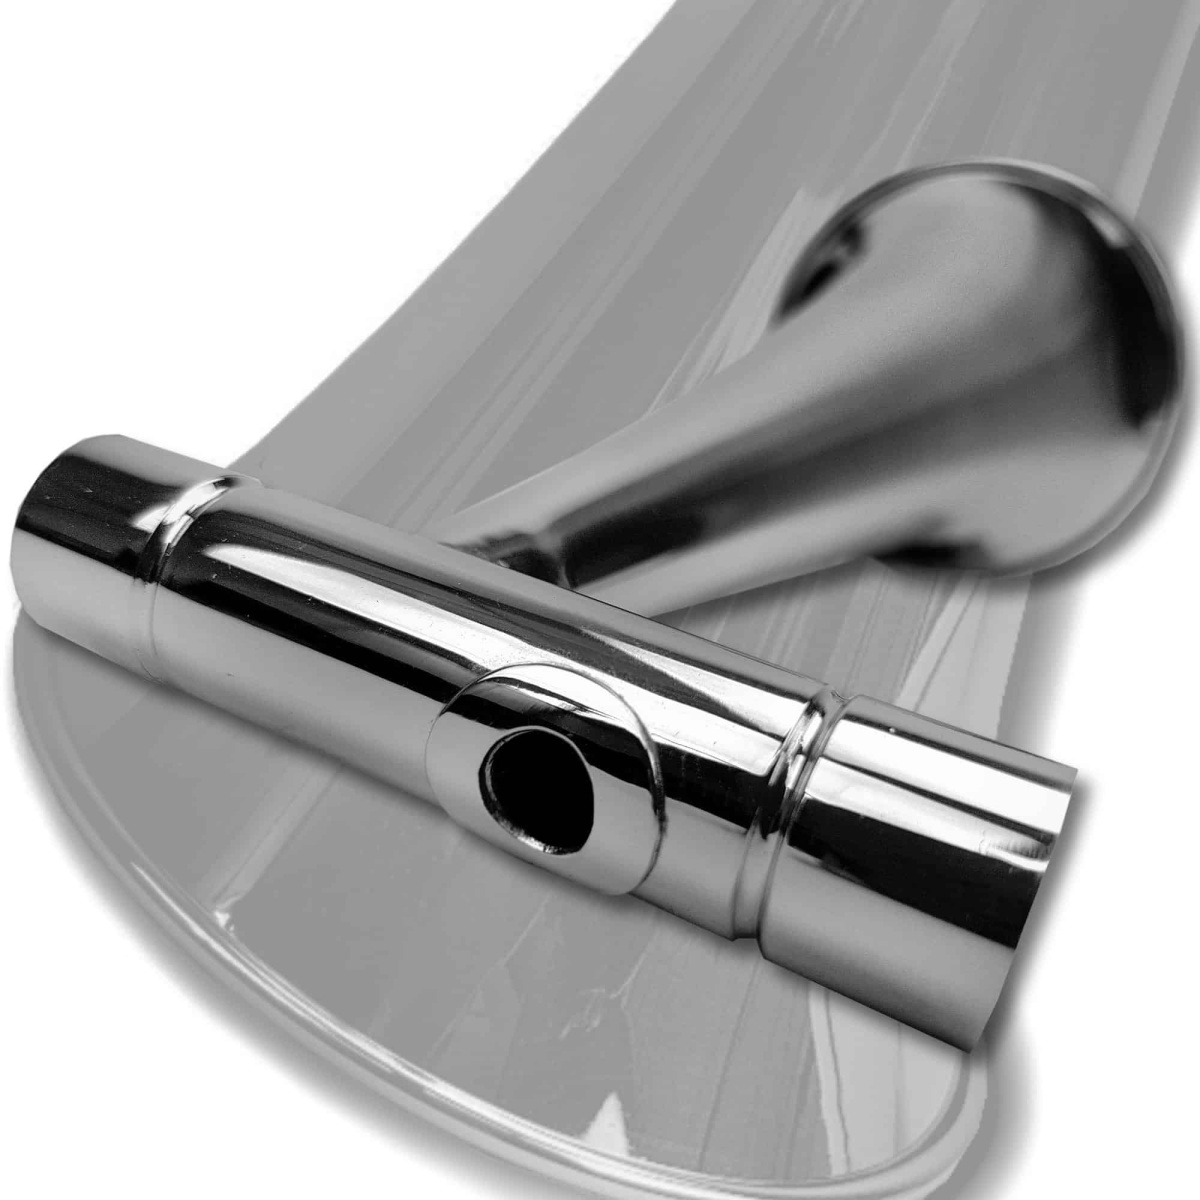 SP Marching Kazoo Magpie Silver plated